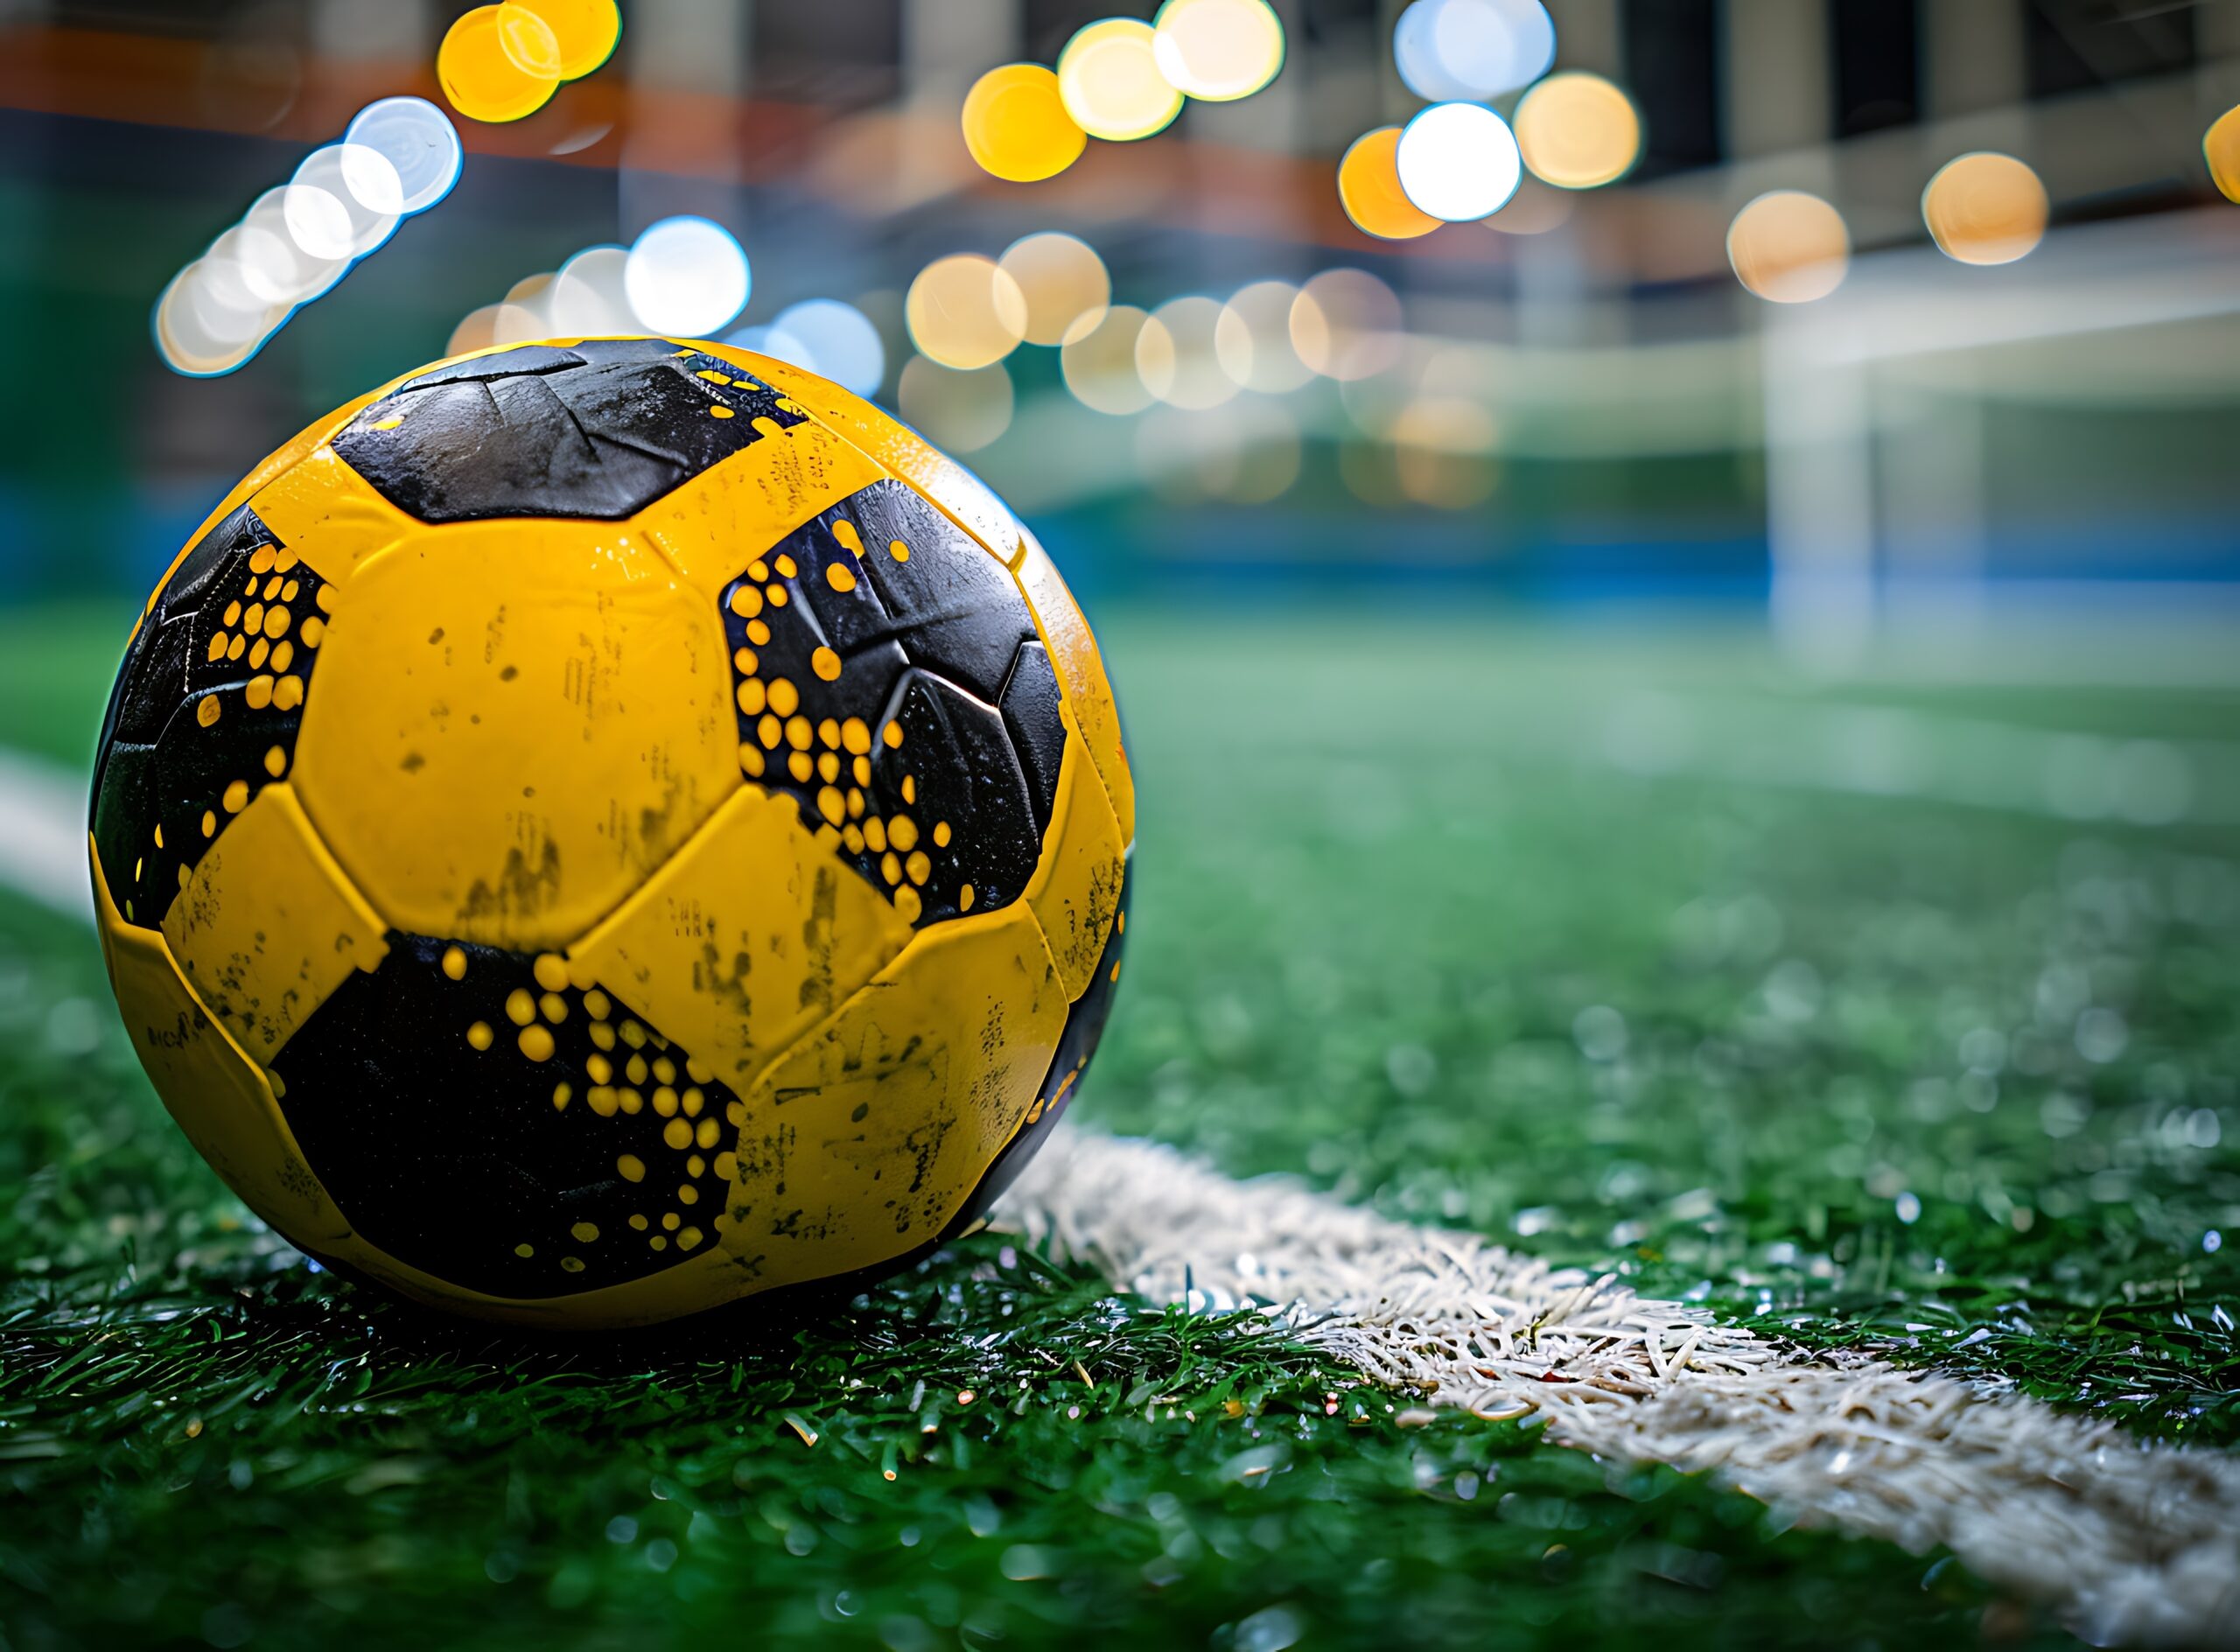 Key Elements of an Indoor Soccer Building Project